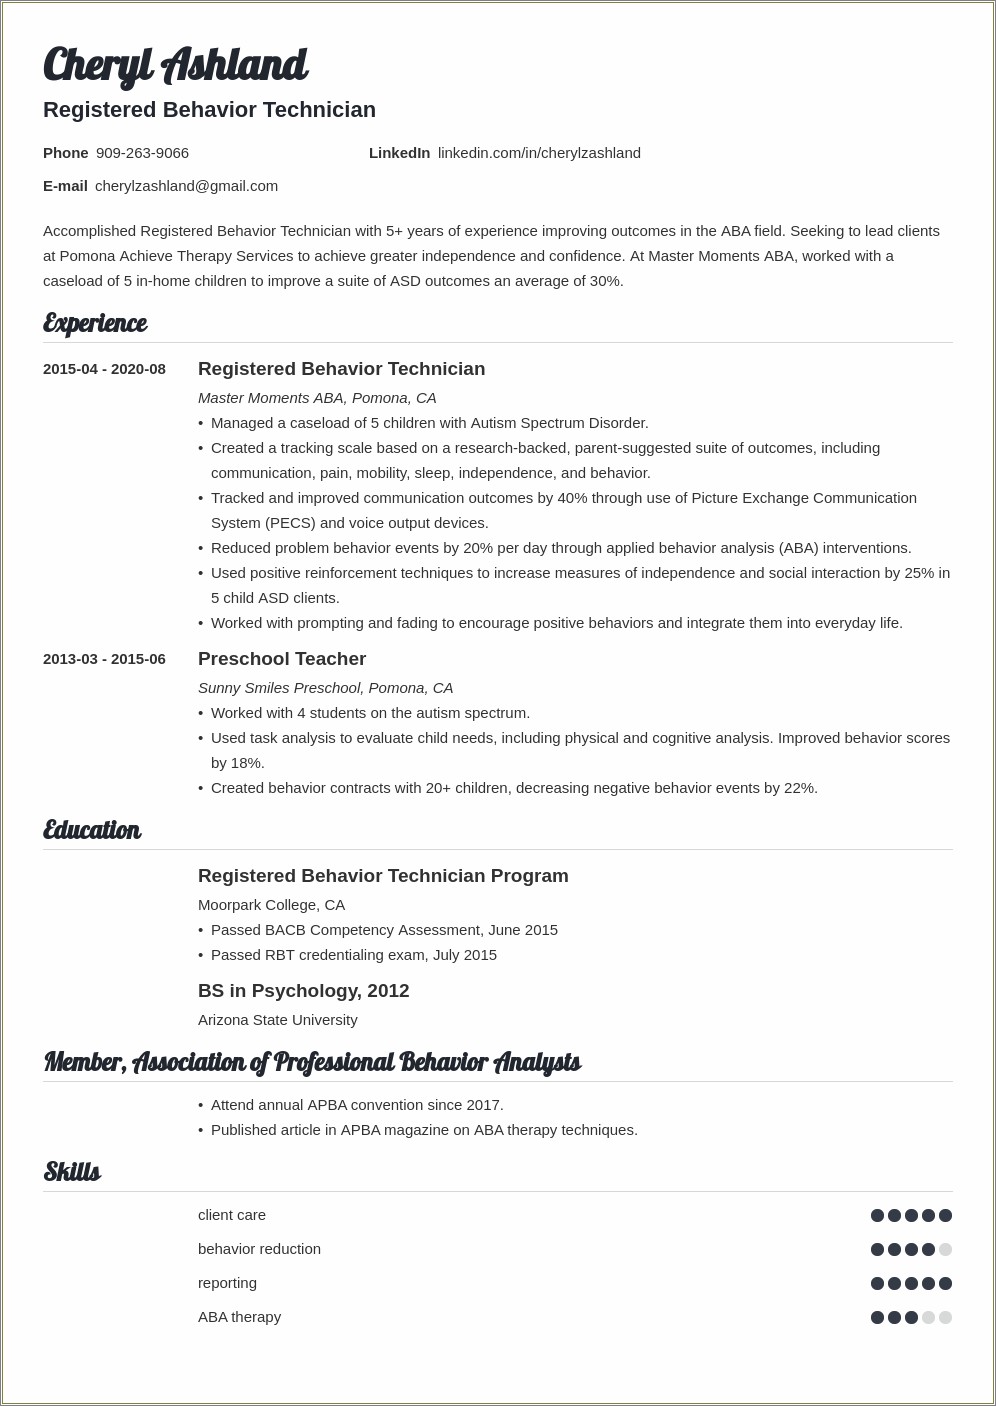 Resume For Working With Child With Autism